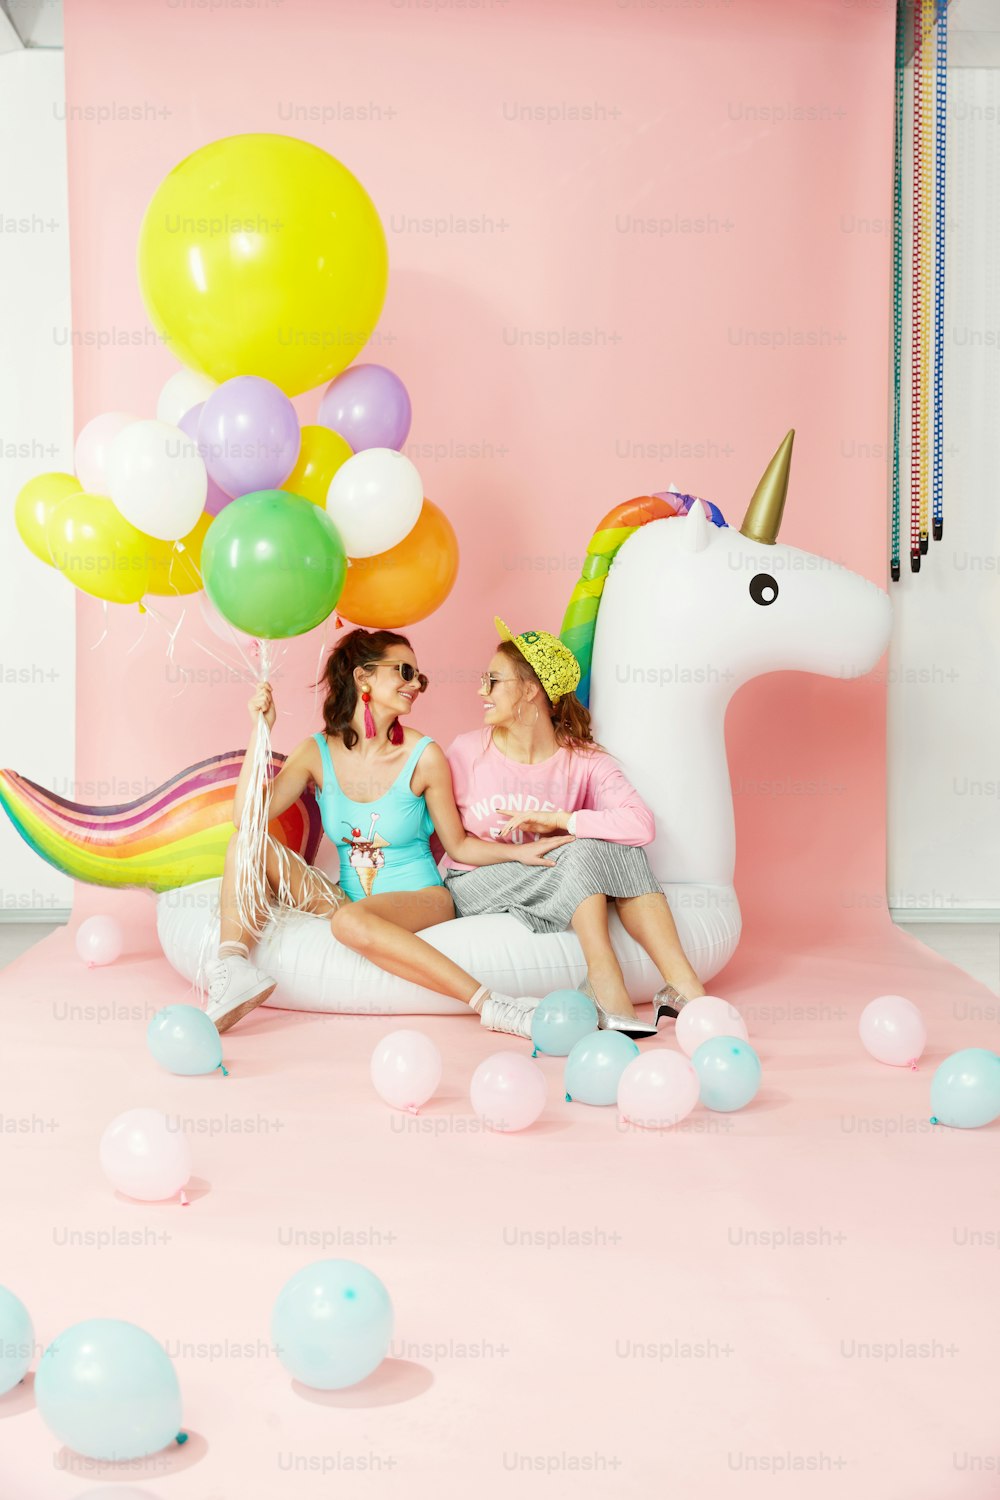 Summer Fun. Happy Women Friends In Fashion Clothes With Balloons. Beautiful Smiling Girls In Colorful Fashionable Clothing Sitting On Inflatable Unicorn Float On Pink Background. High Resolution